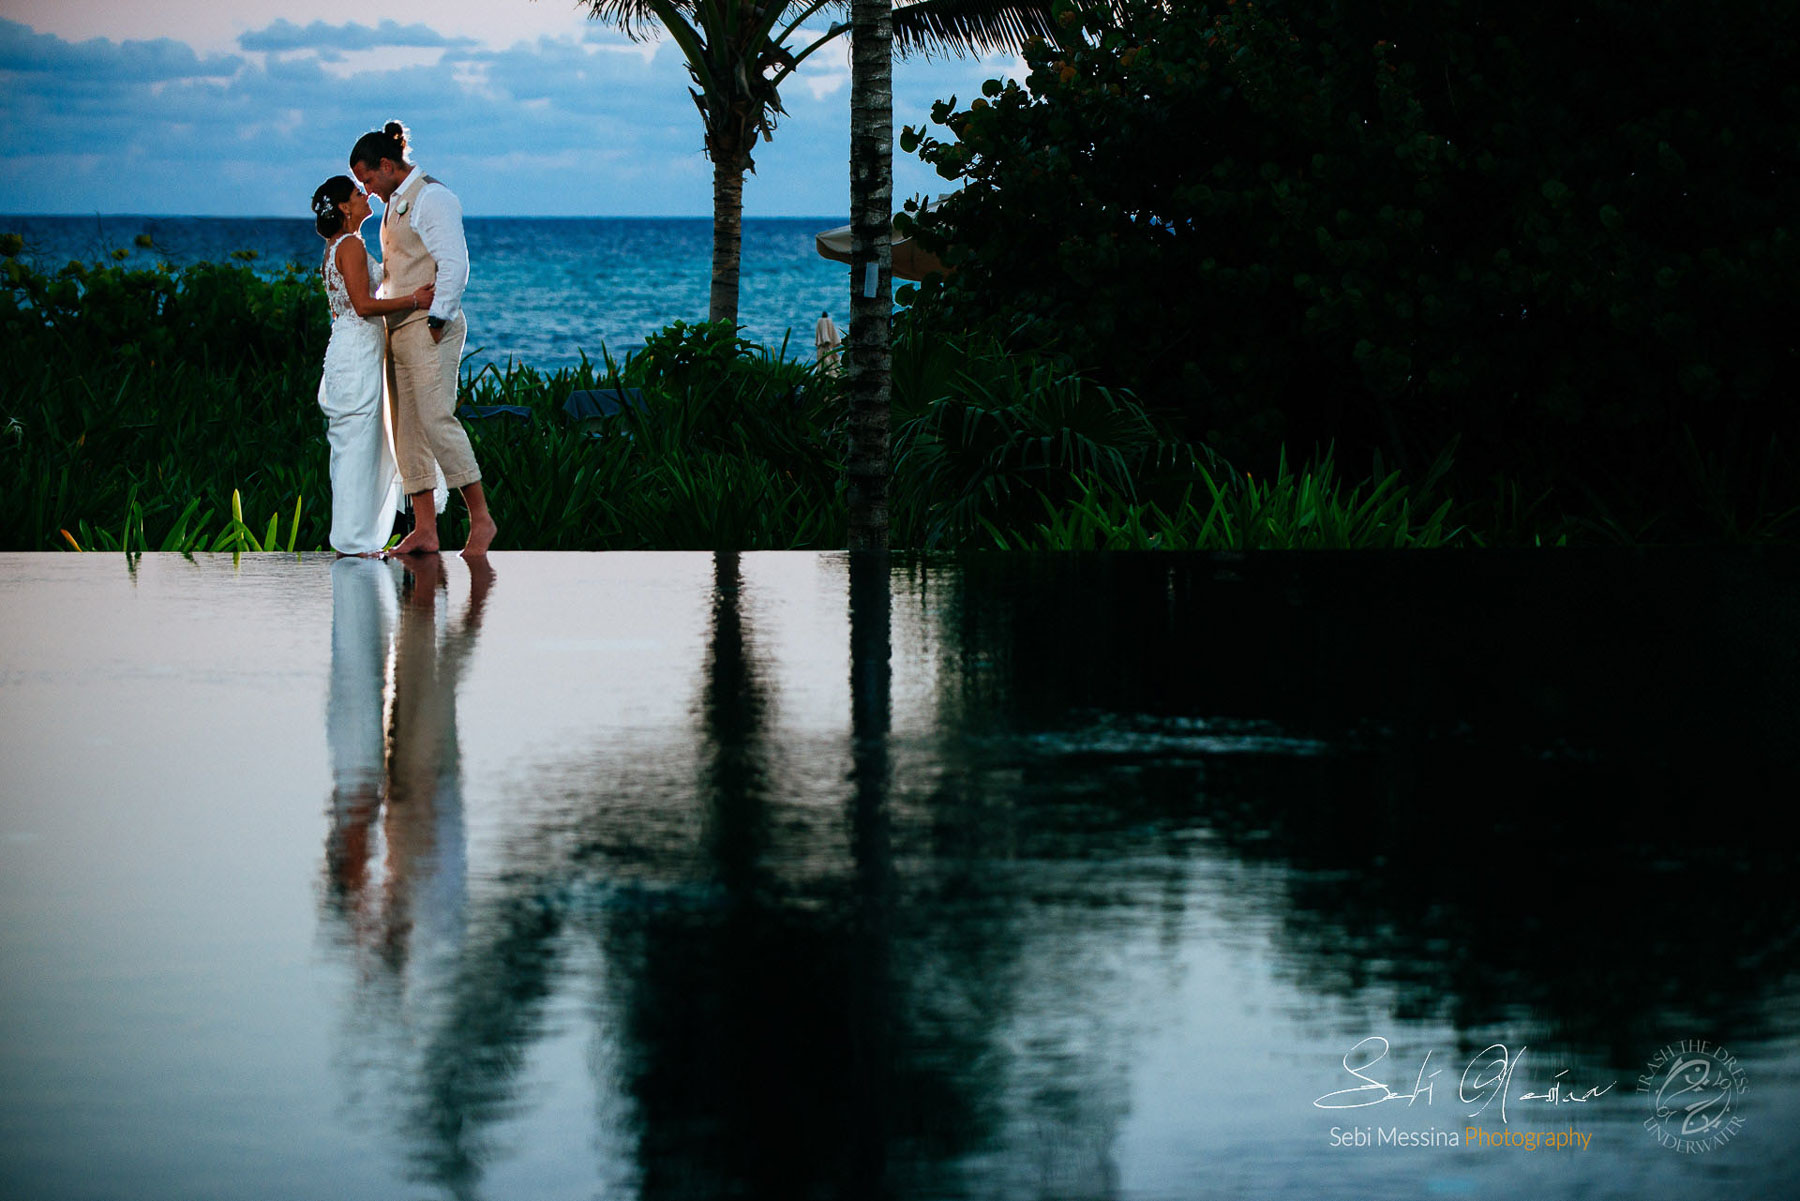 Post Wedding ceremony images in Mexico – Sebi Messina Photography